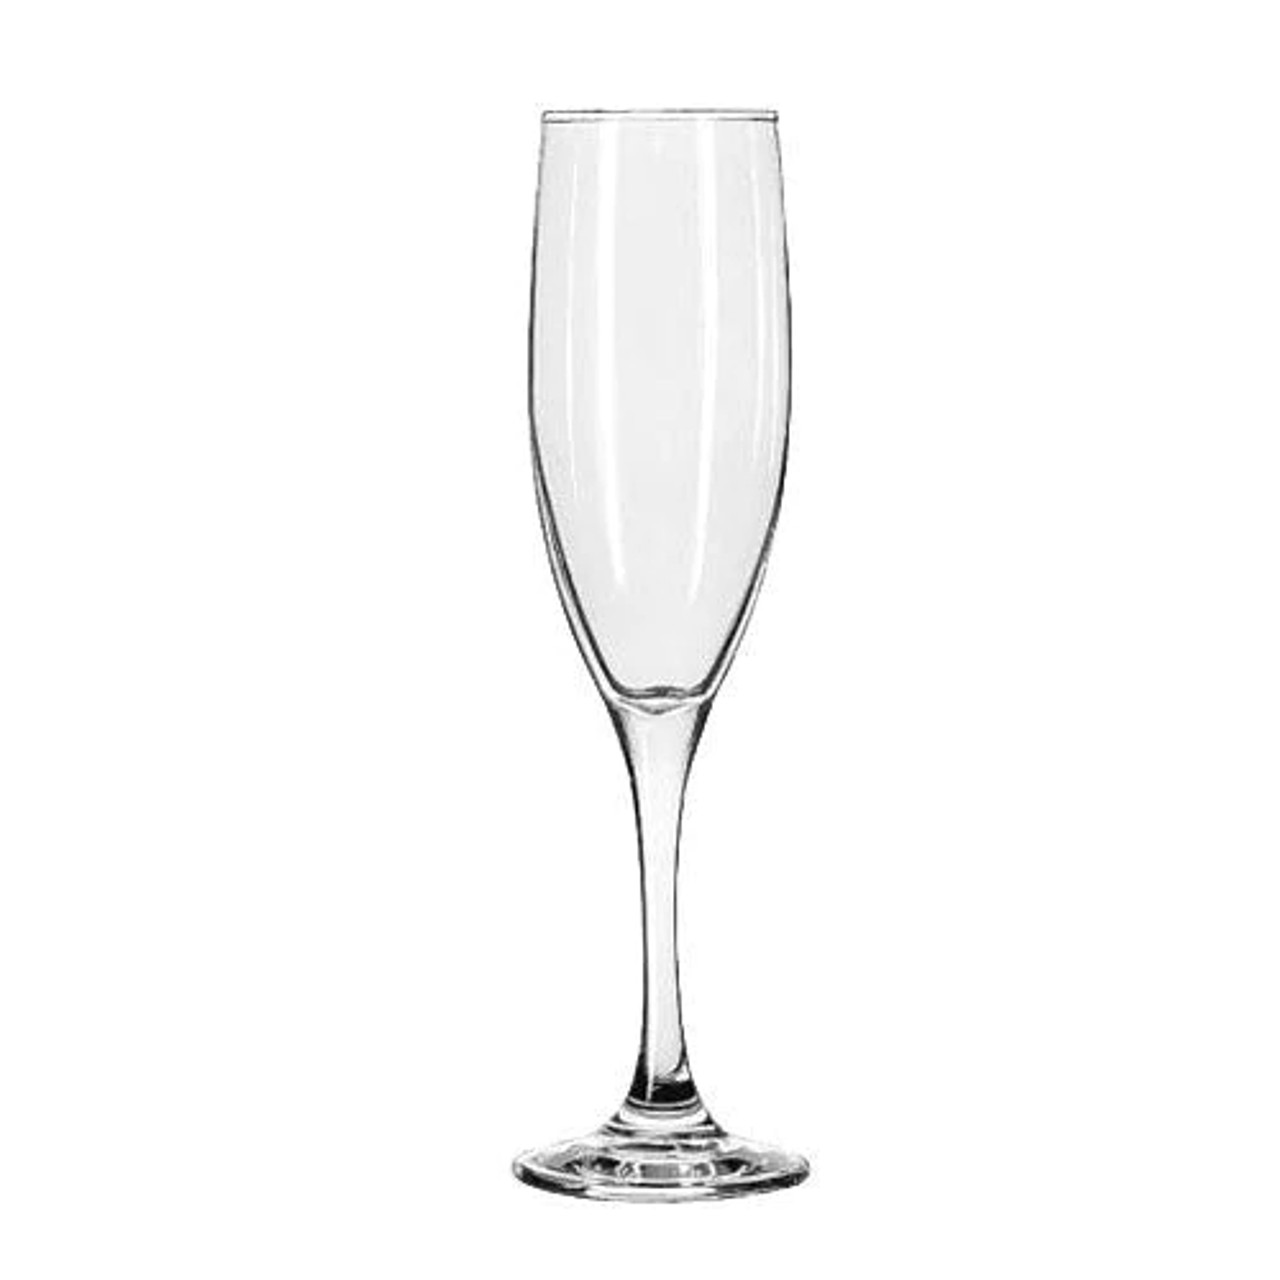 https://cdn11.bigcommerce.com/s-68xca4gnzg/images/stencil/1280x1280/products/162/615/libbey-3796-6-oz-tall-flute-embassy-royale-12case-854551__59156.1658697961.jpg?c=1